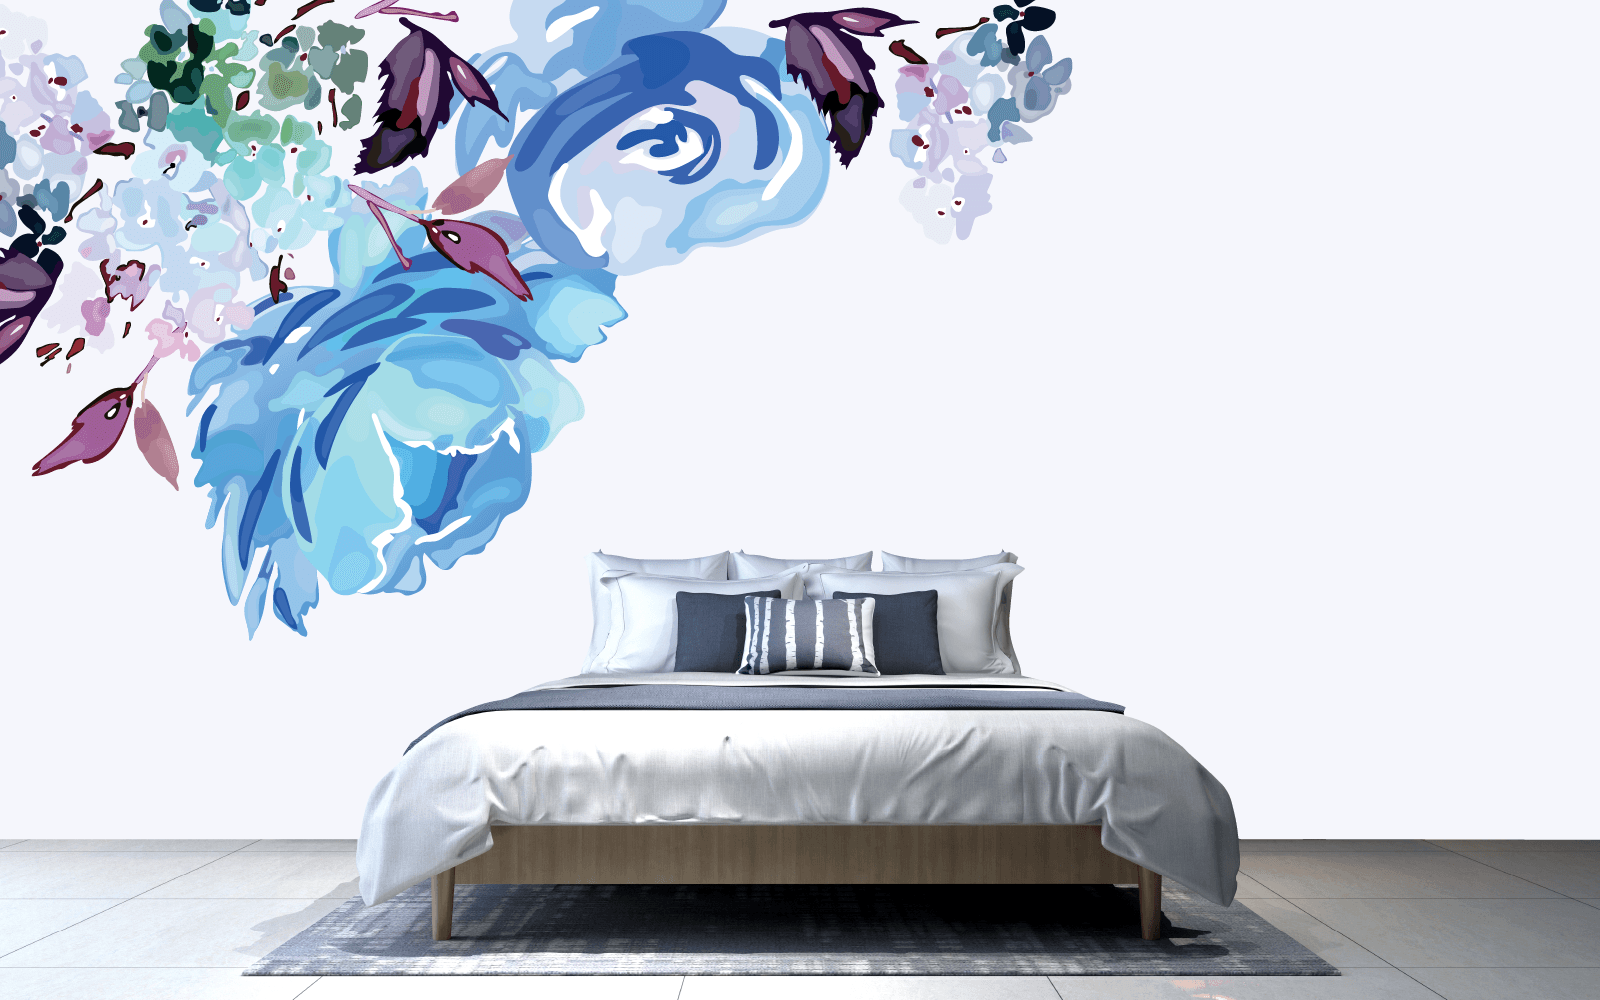 A sweet splash of watercolor makes for an excellent asymmetrical anchor to your floral theme.